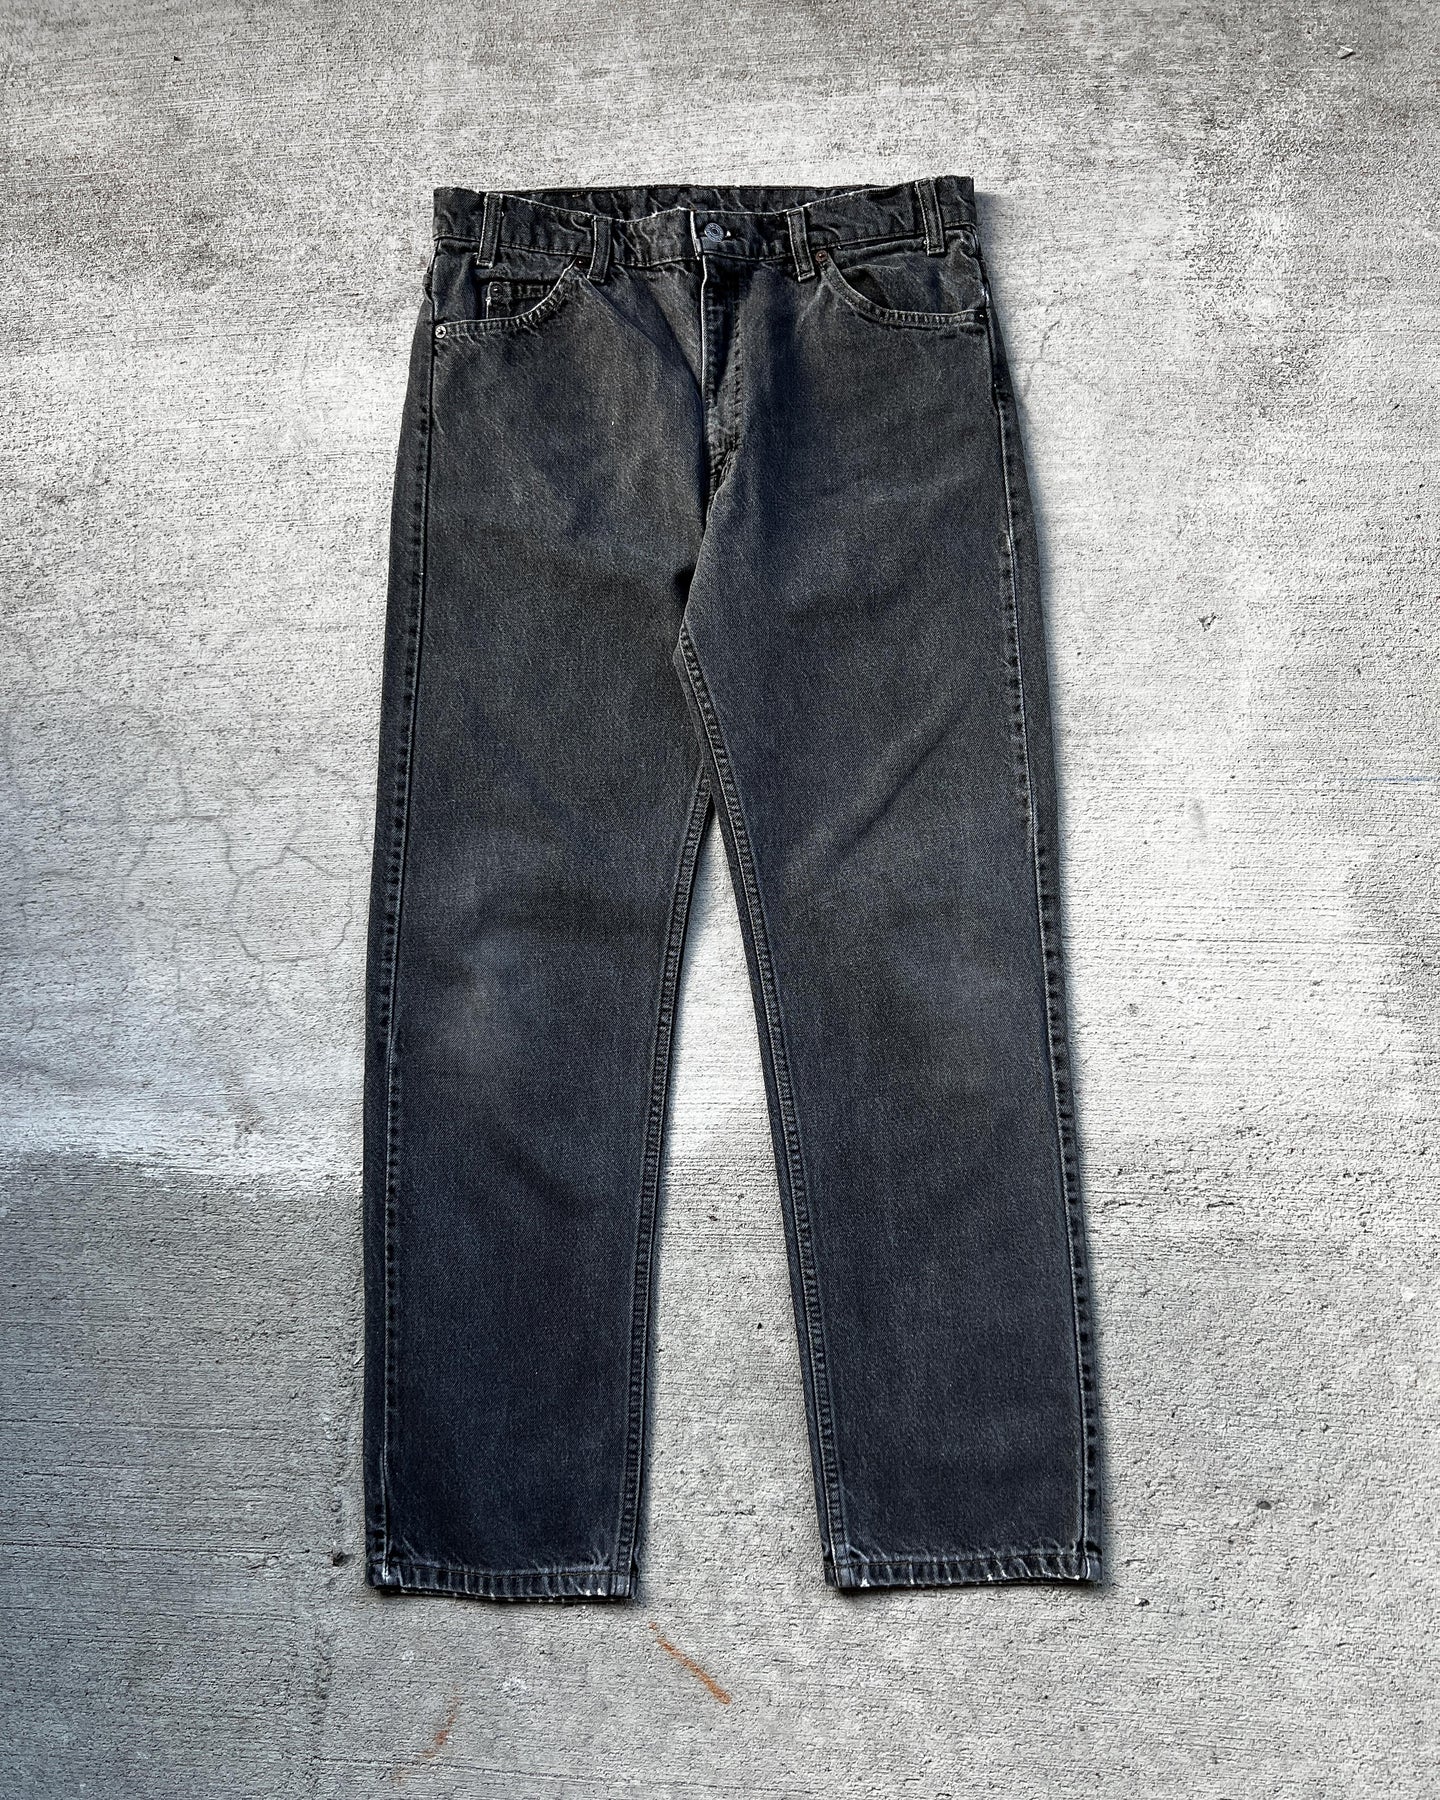 1990s Charcoal Grey Levi's 505 - Size 35 x 32